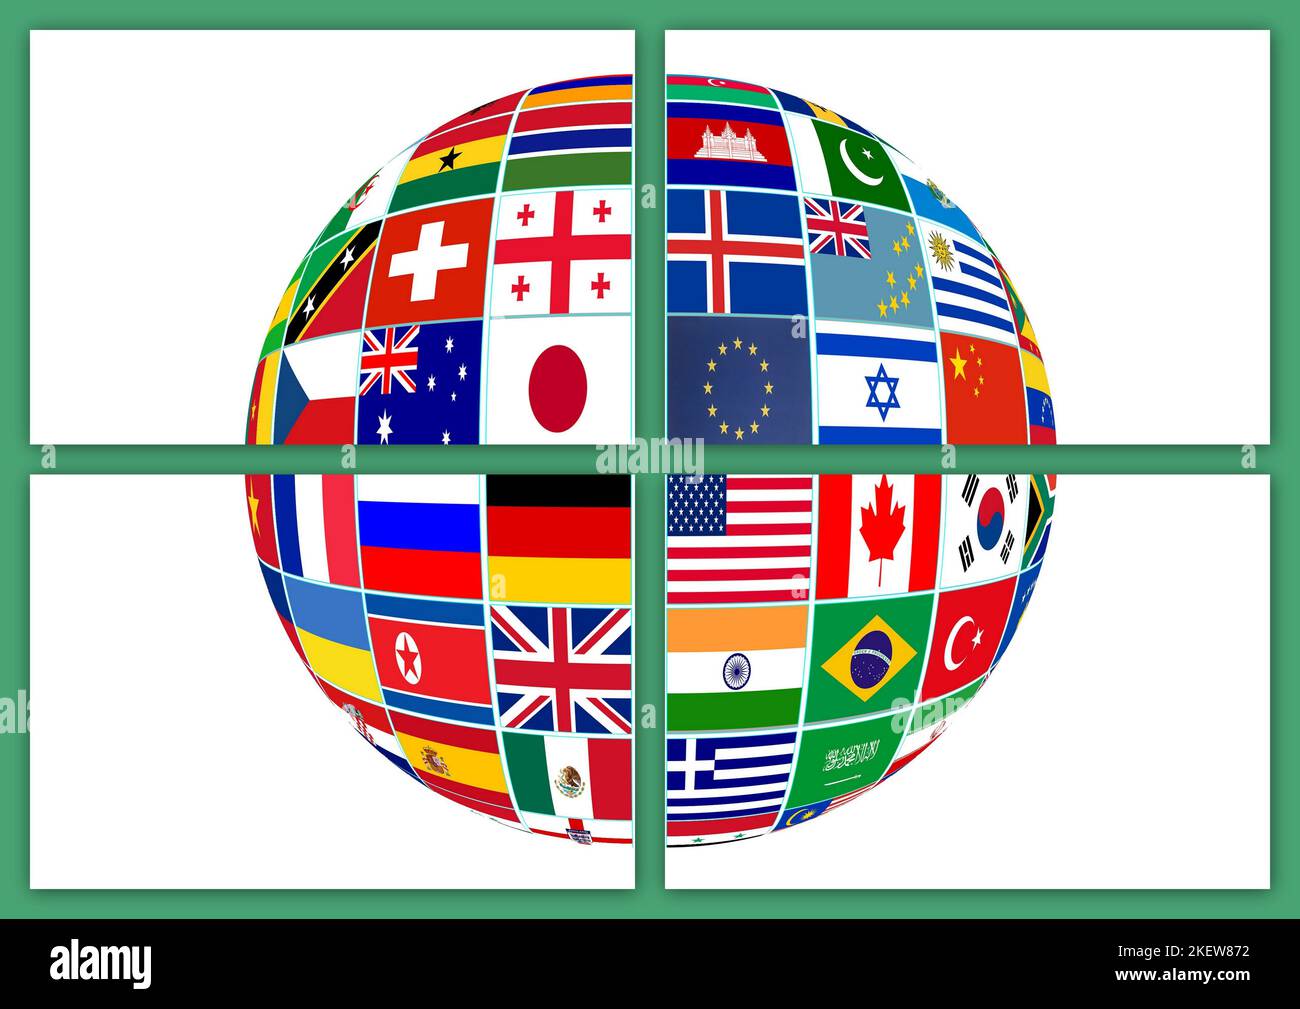 Flags all countries on globe isolated on a white background. Stock Photo